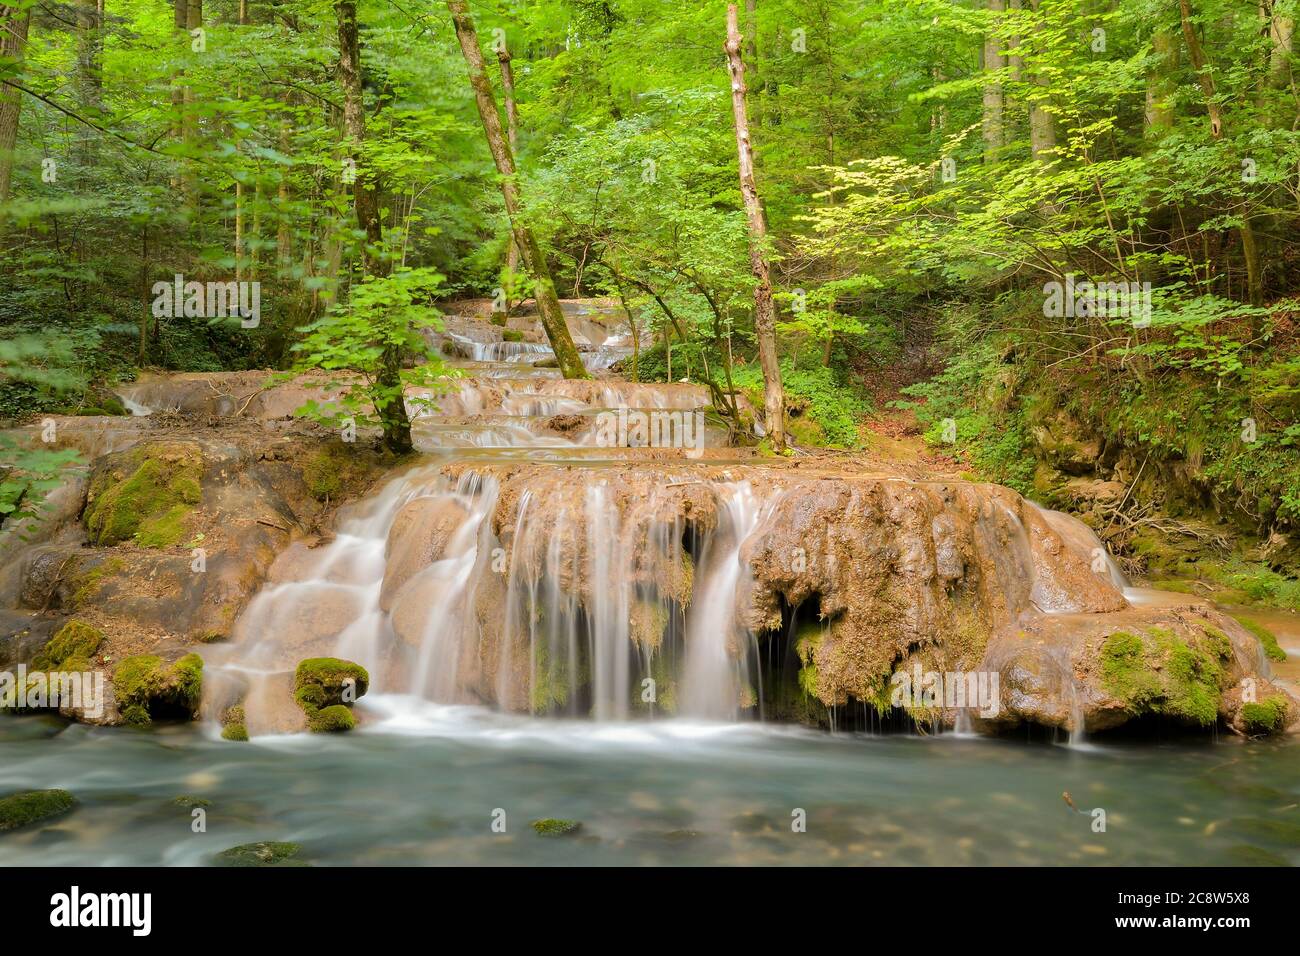 Cheile Nerei - Beusnita. Caras. Romania. Summer in wild Romanian river and forest. Long exposure. Stock Photo